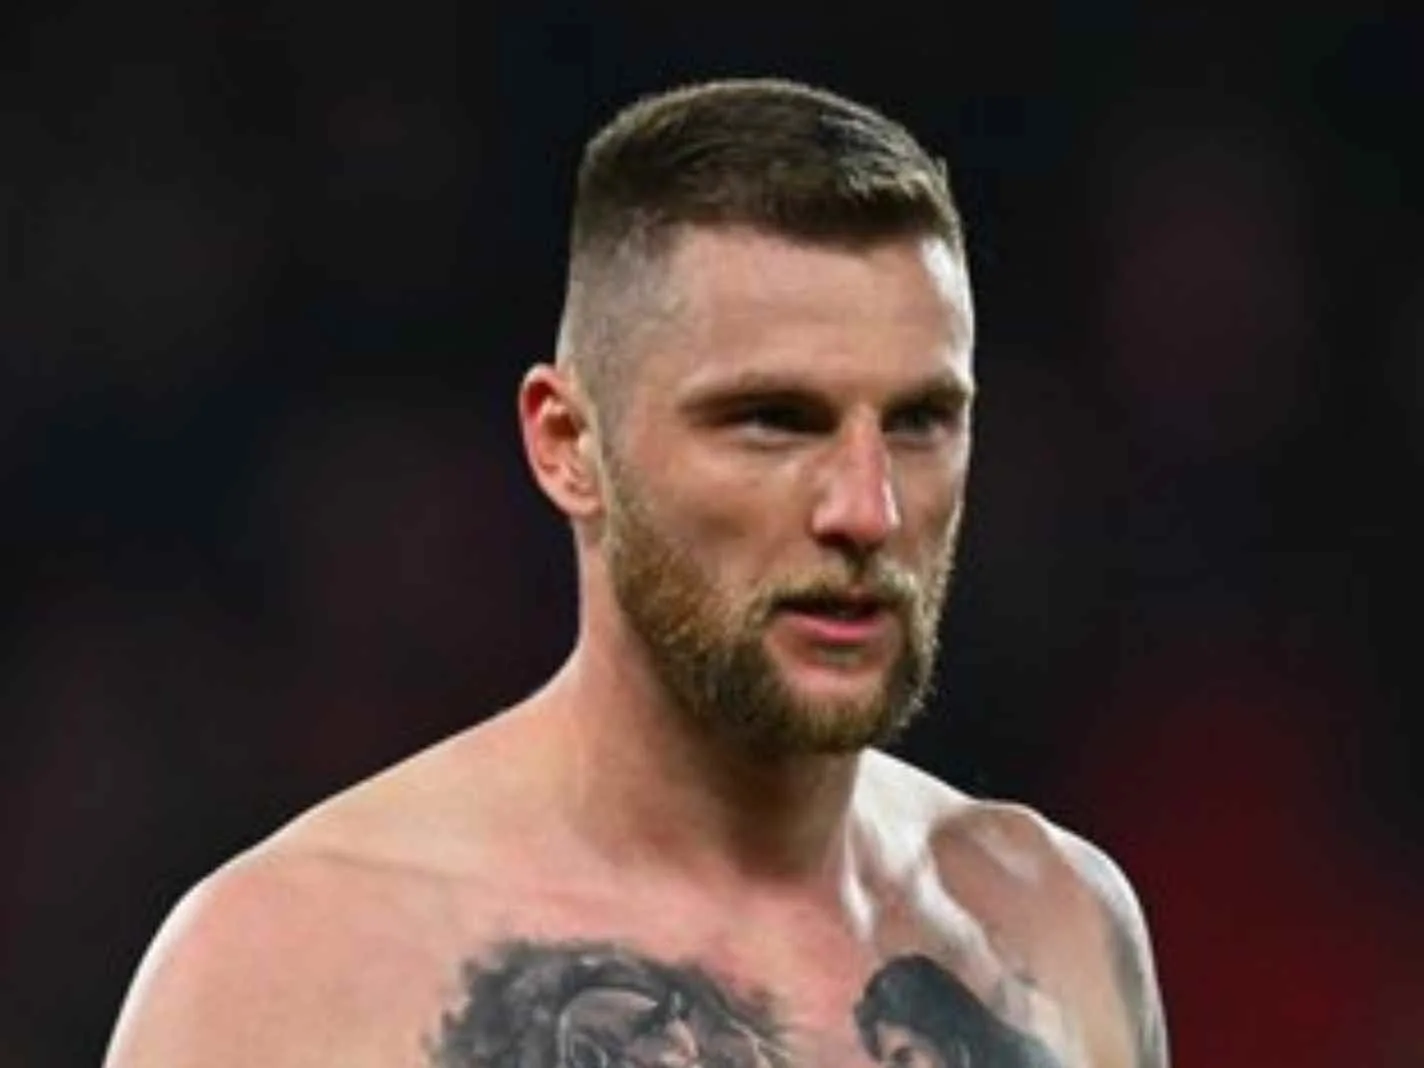 Inter Milan's Skriniar with most outrageous chest tattoo